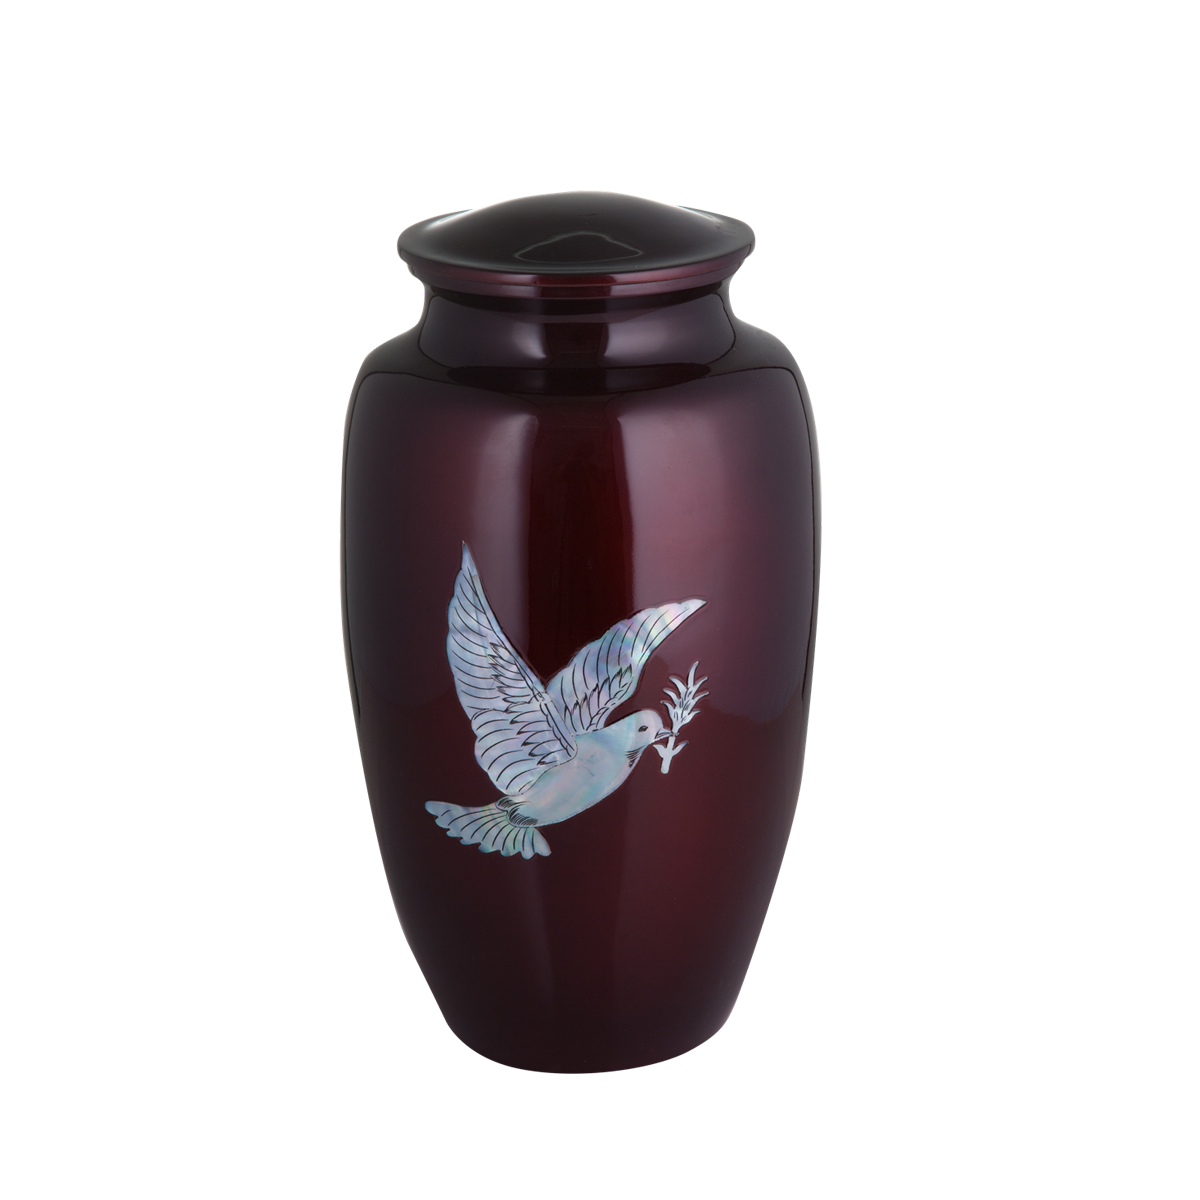 Burgundy Mother of Pearl Dove Inlay Urn